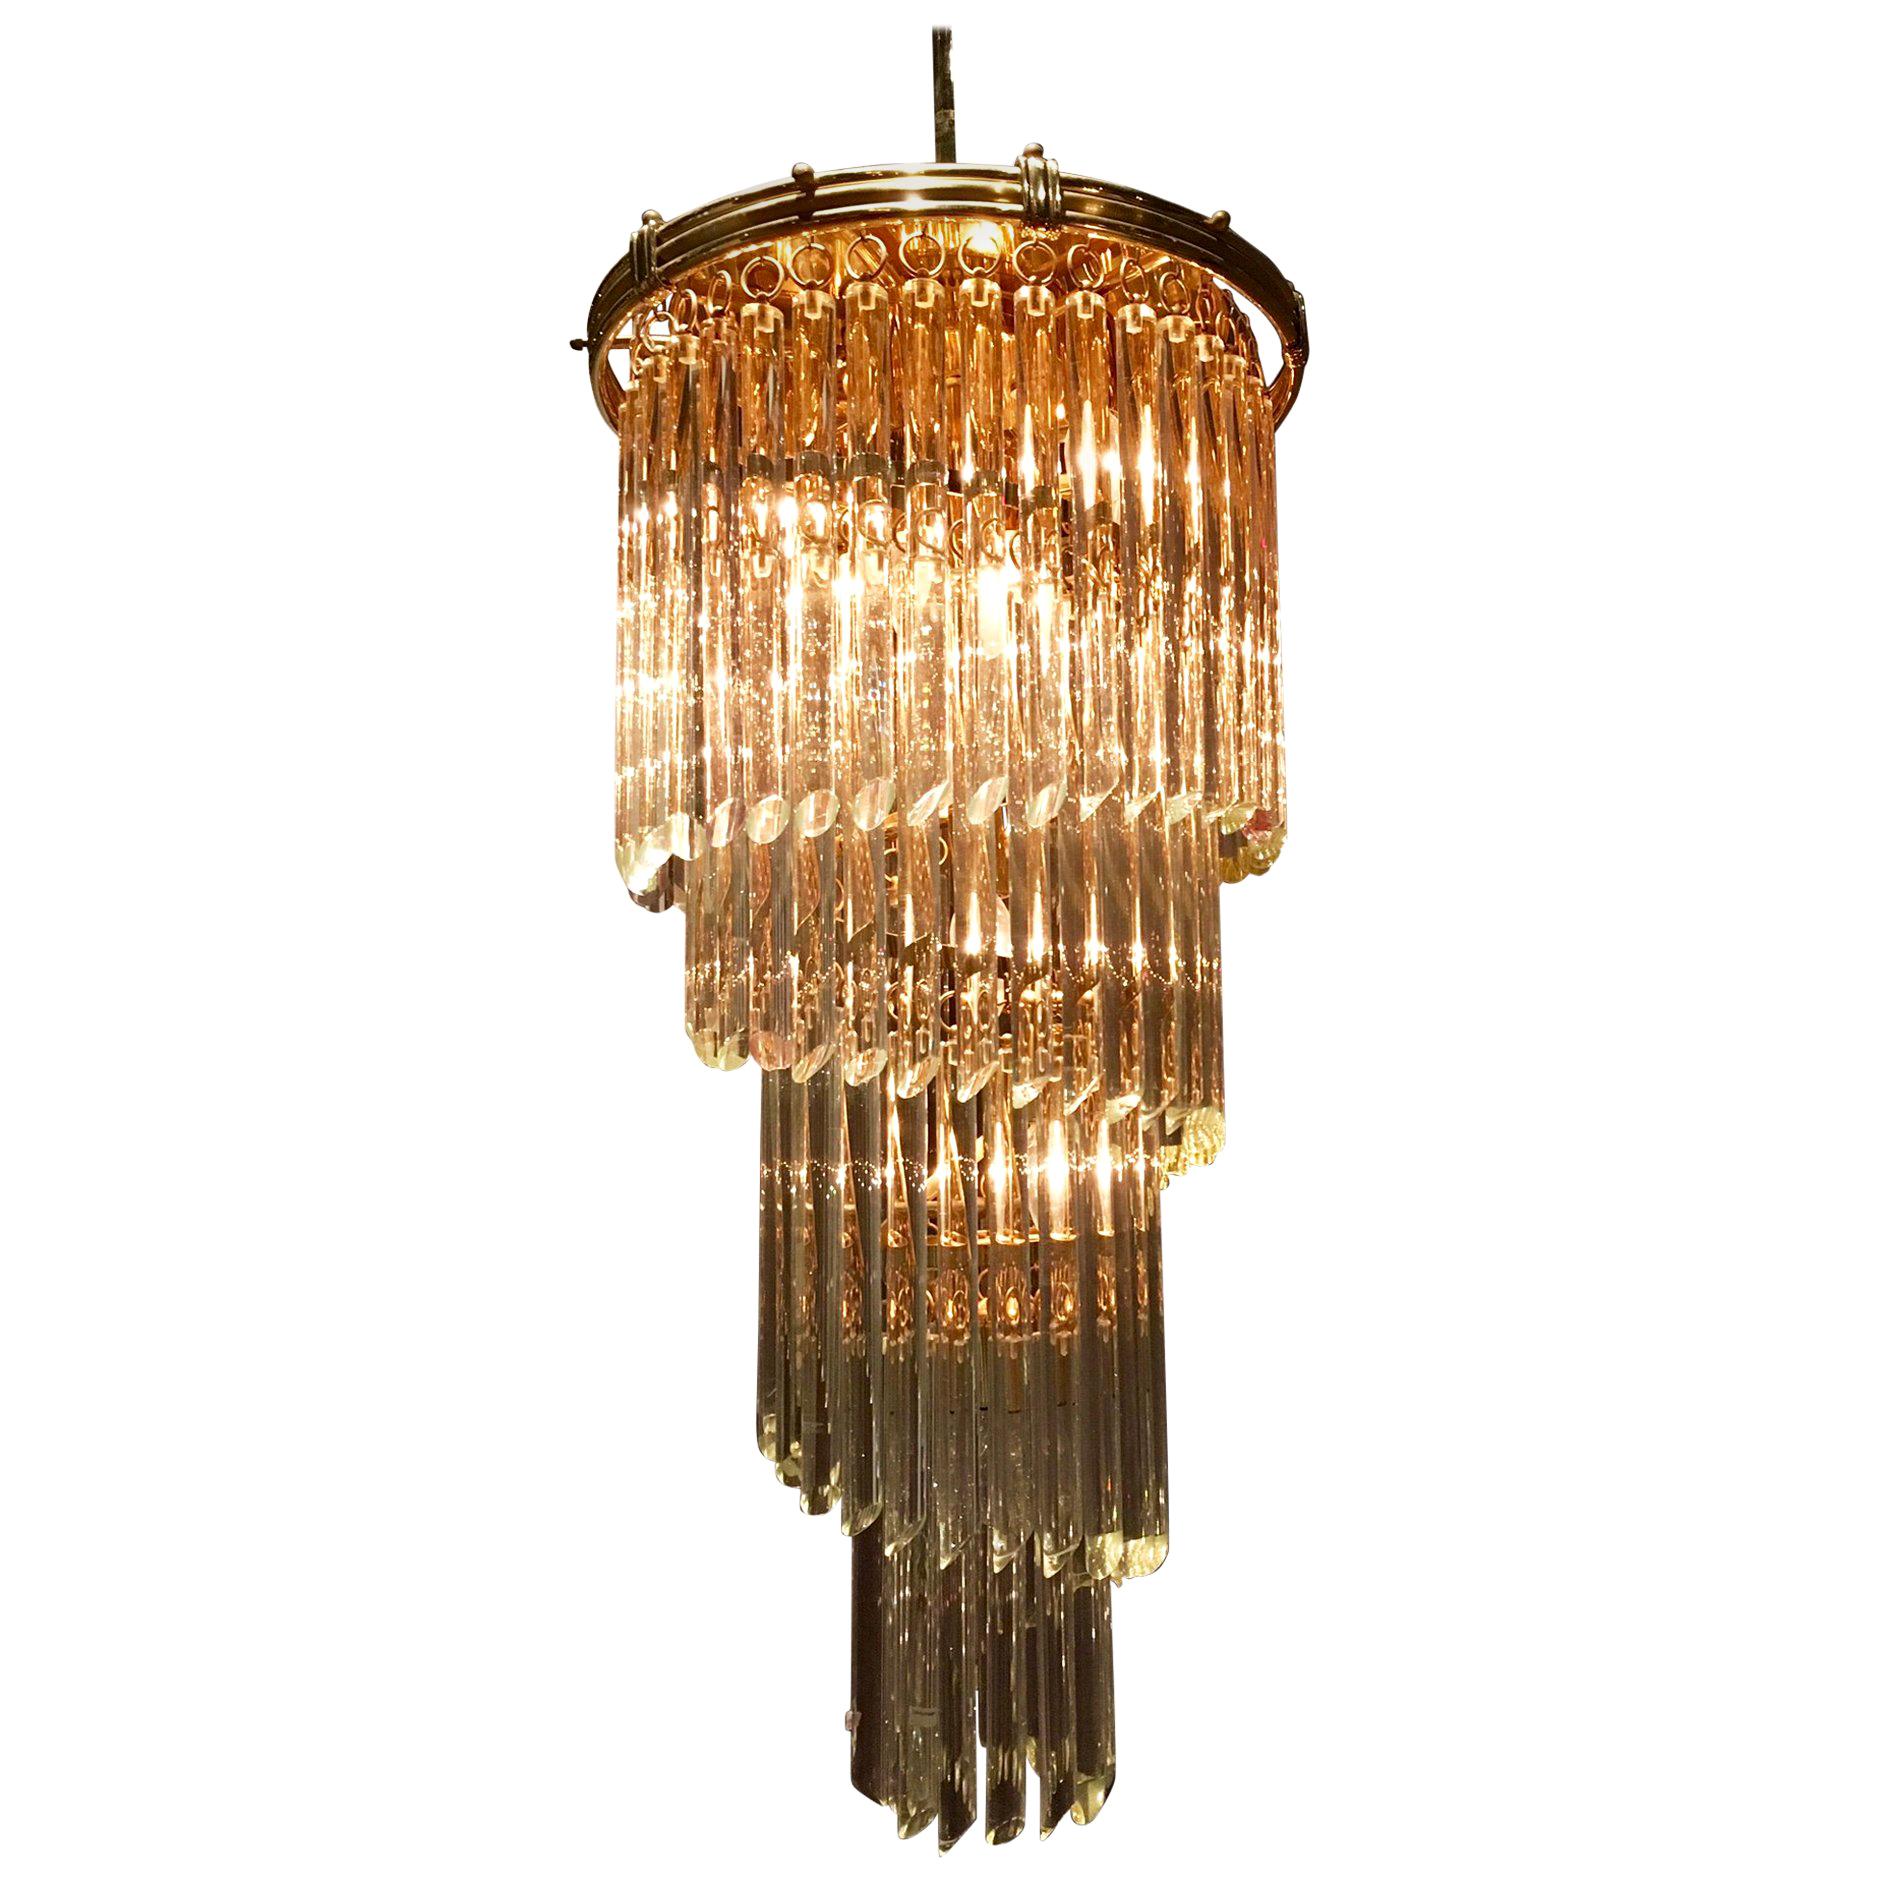 1970s Chandelier in the Style of Venini